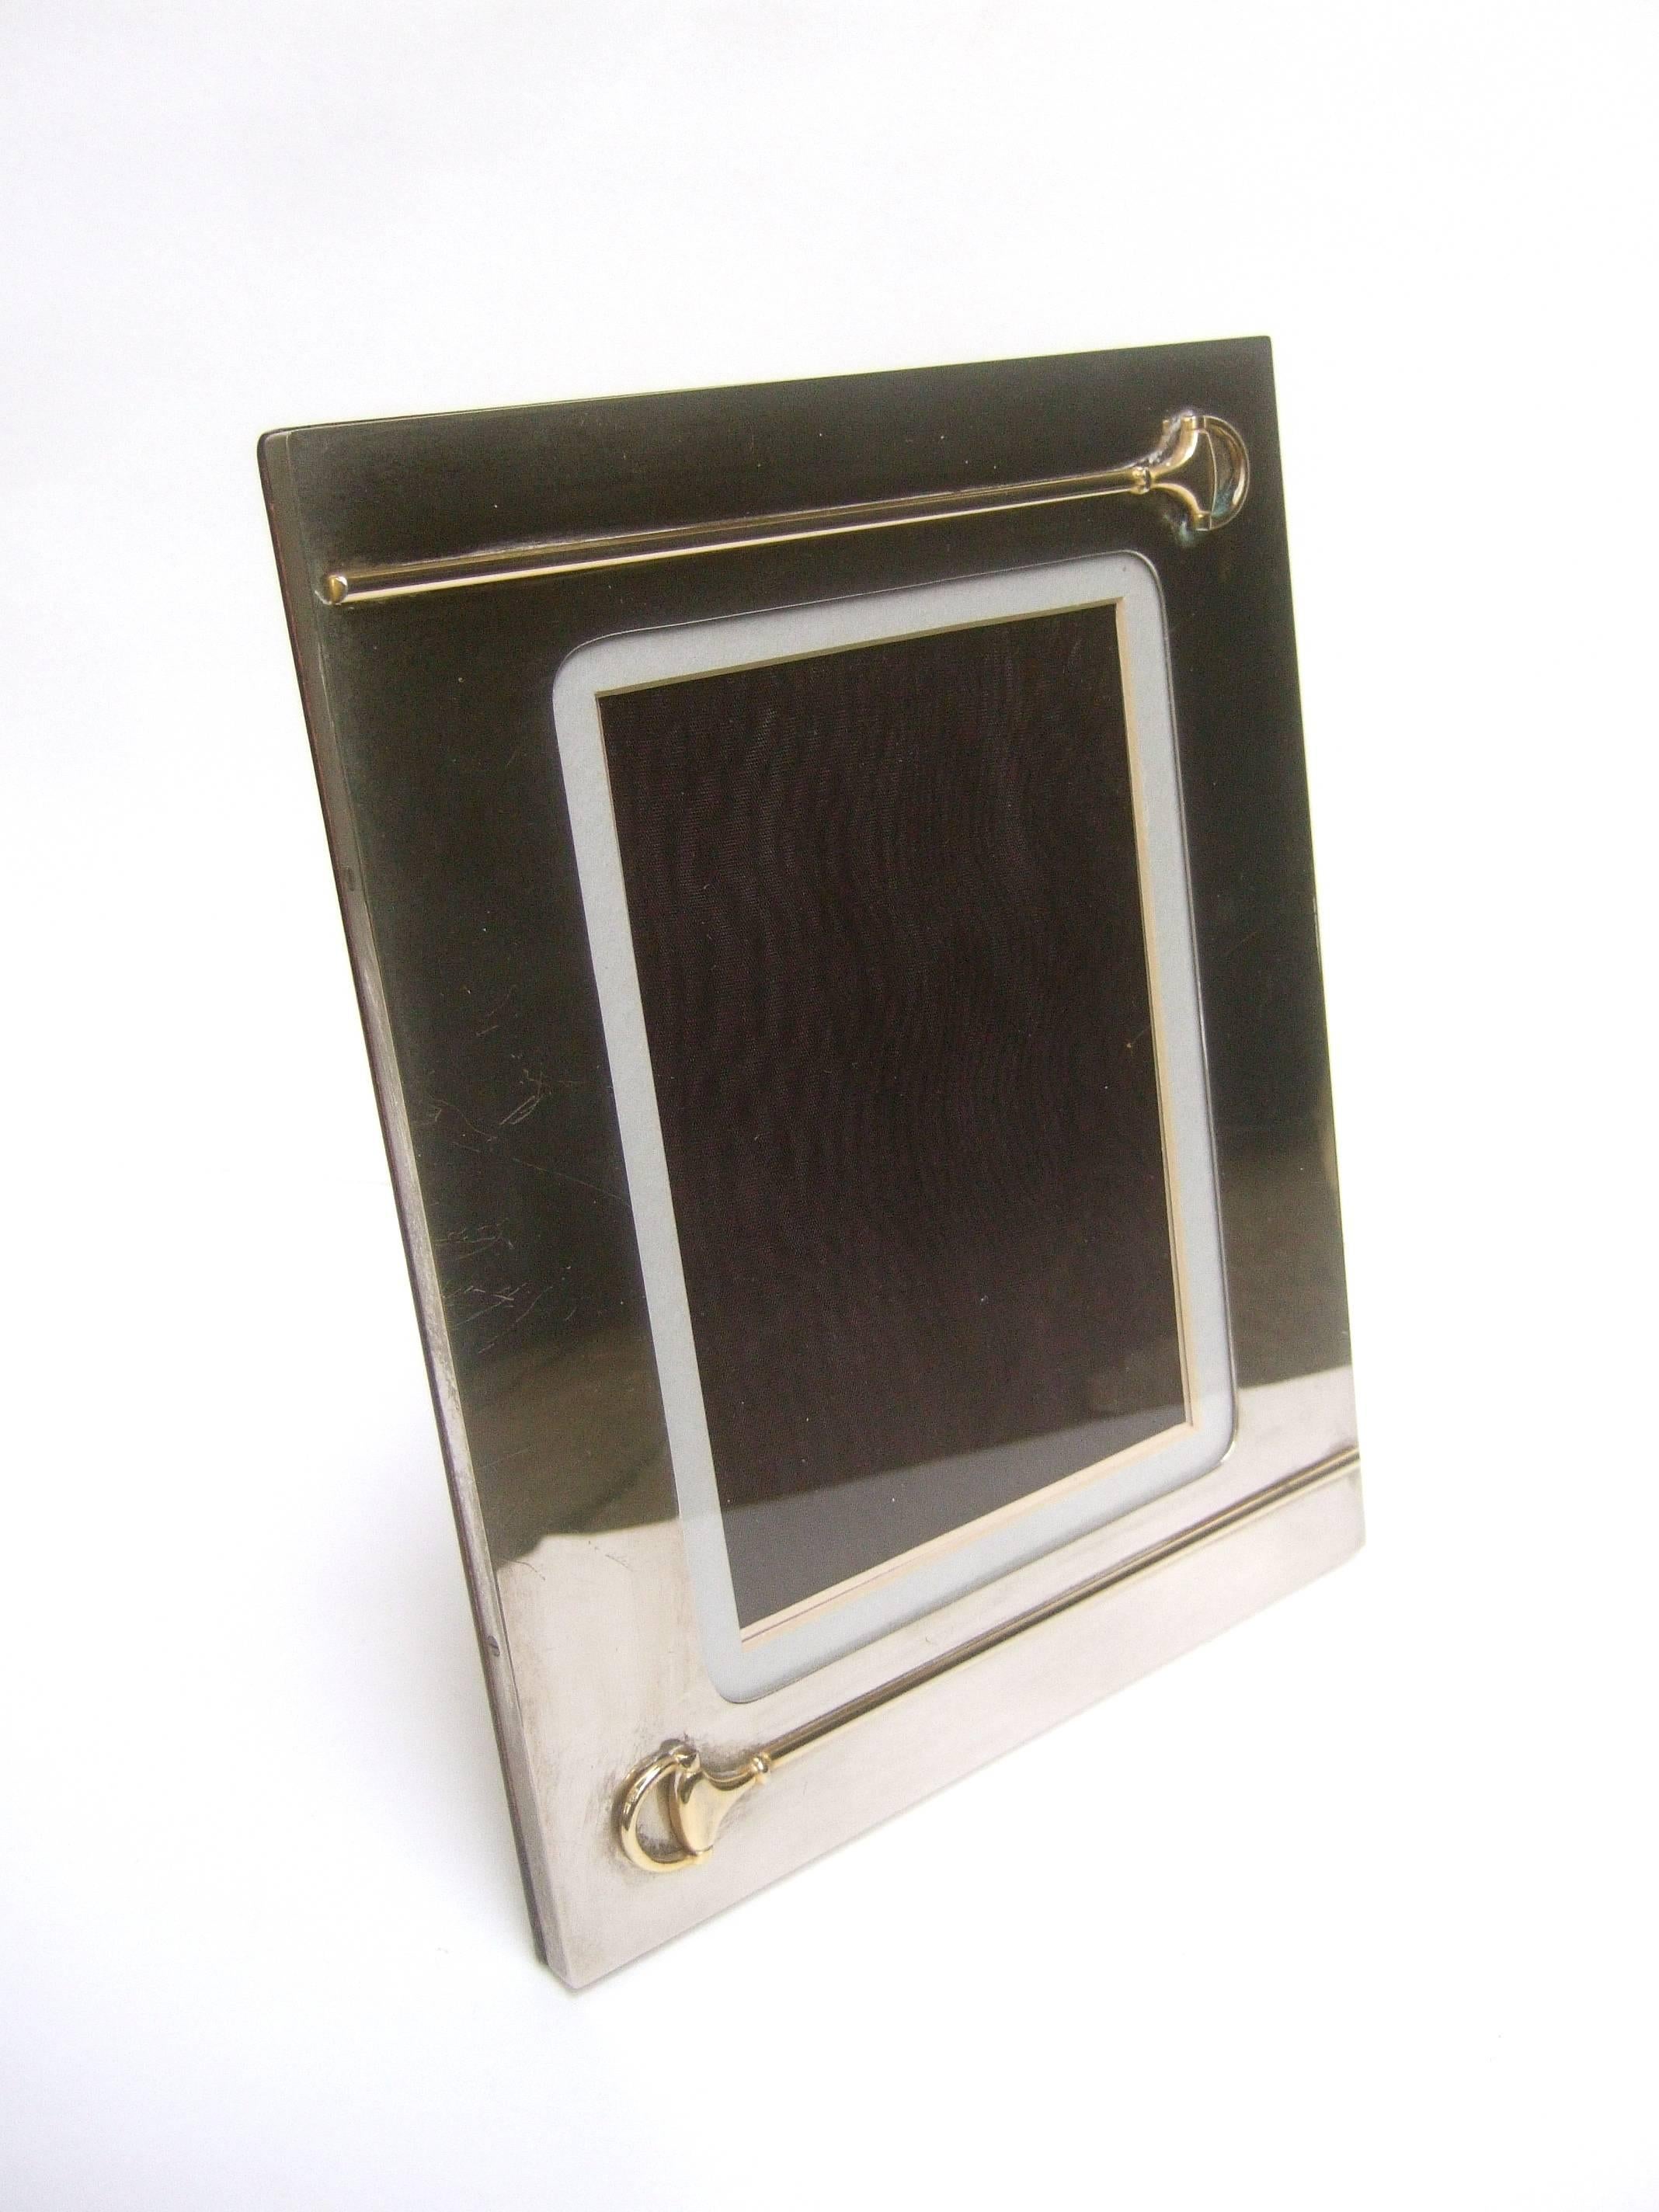 Gucci Italy Sleek chrome metal picture frame c 1970s 
The elegant chrome photo frame is embellished 
with a pair of Gucci's signature gilt metal bridals

The interior backing is taffeta. The back exterior
side is lacquered wood. The base is